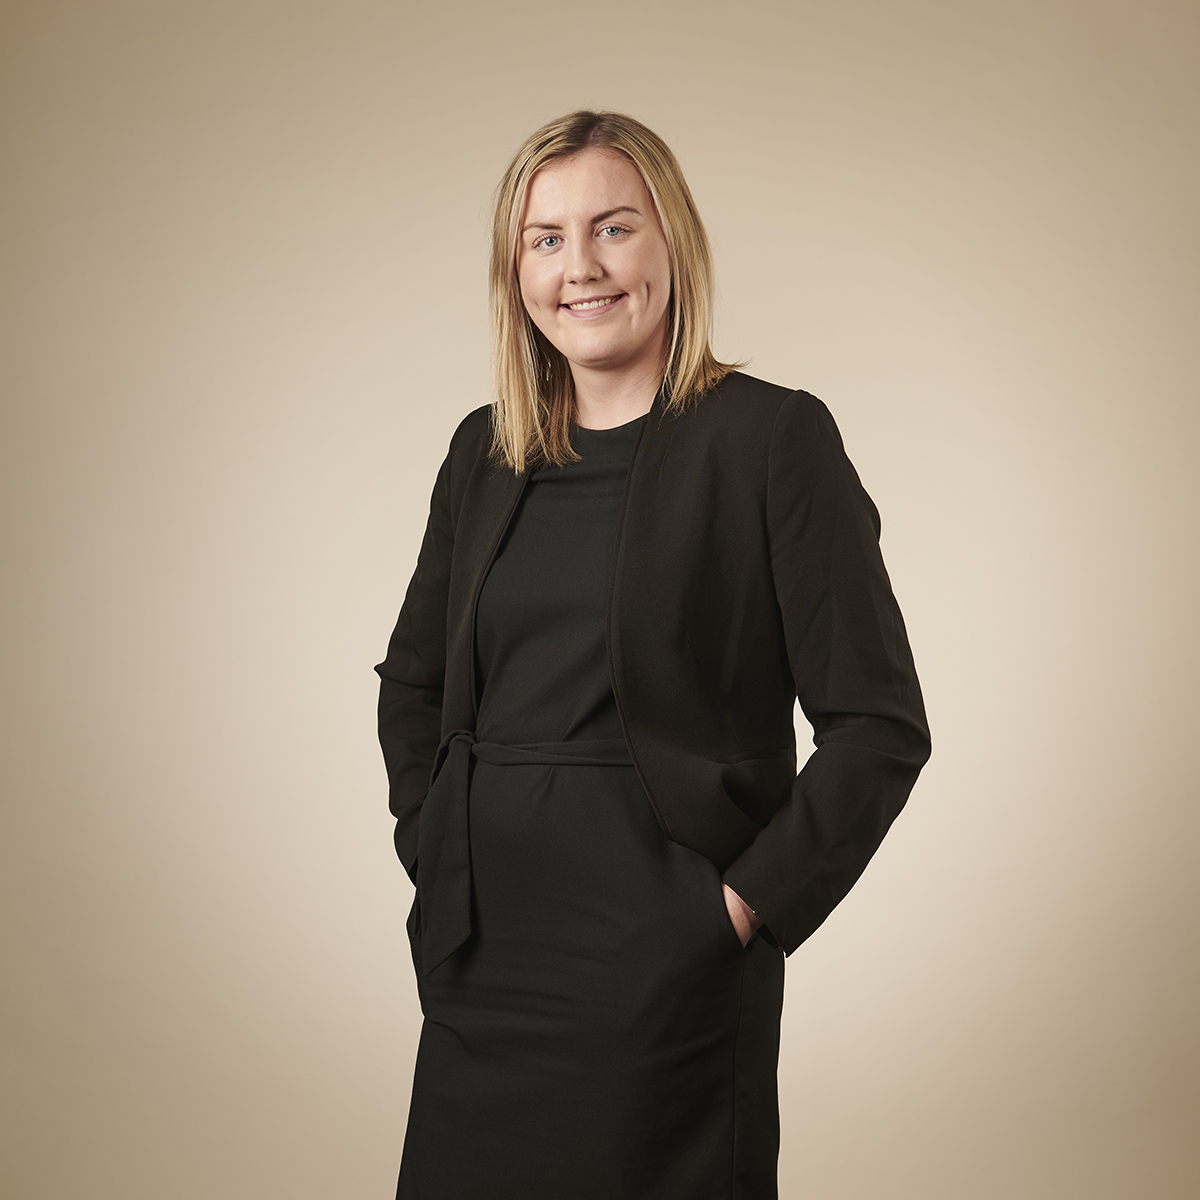 Laura Donohoe, Trainee Solicitor